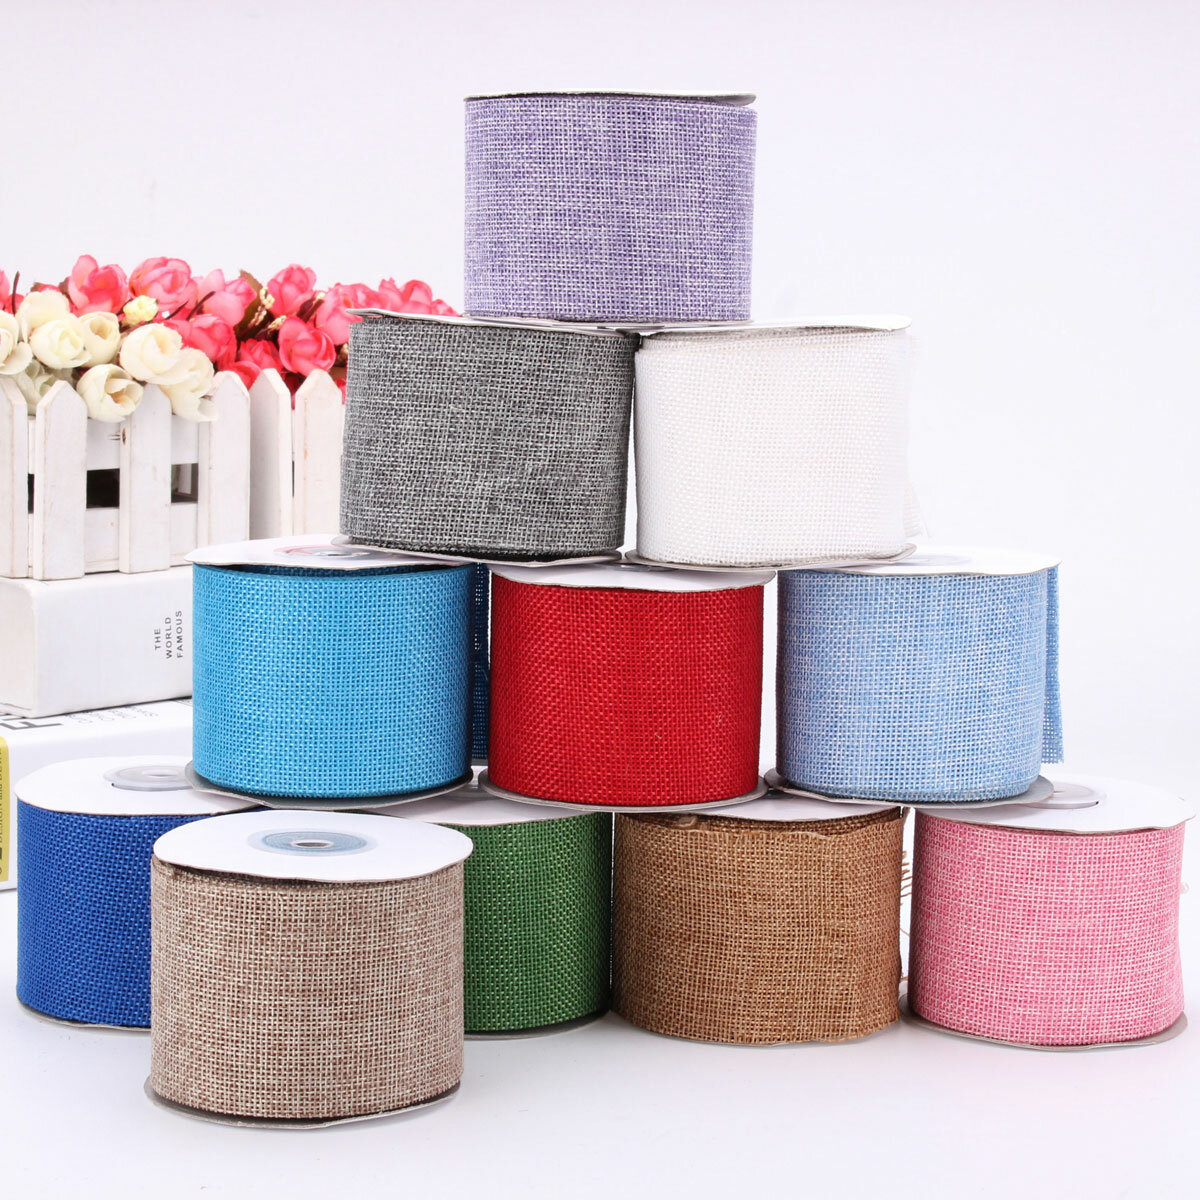 

6CM 10M Faux Burlap Hessian Jute Bow Tape Arts Craft Gift Wrap Rustic Wired Ribbon Wedding Supply, White black gray yellow red